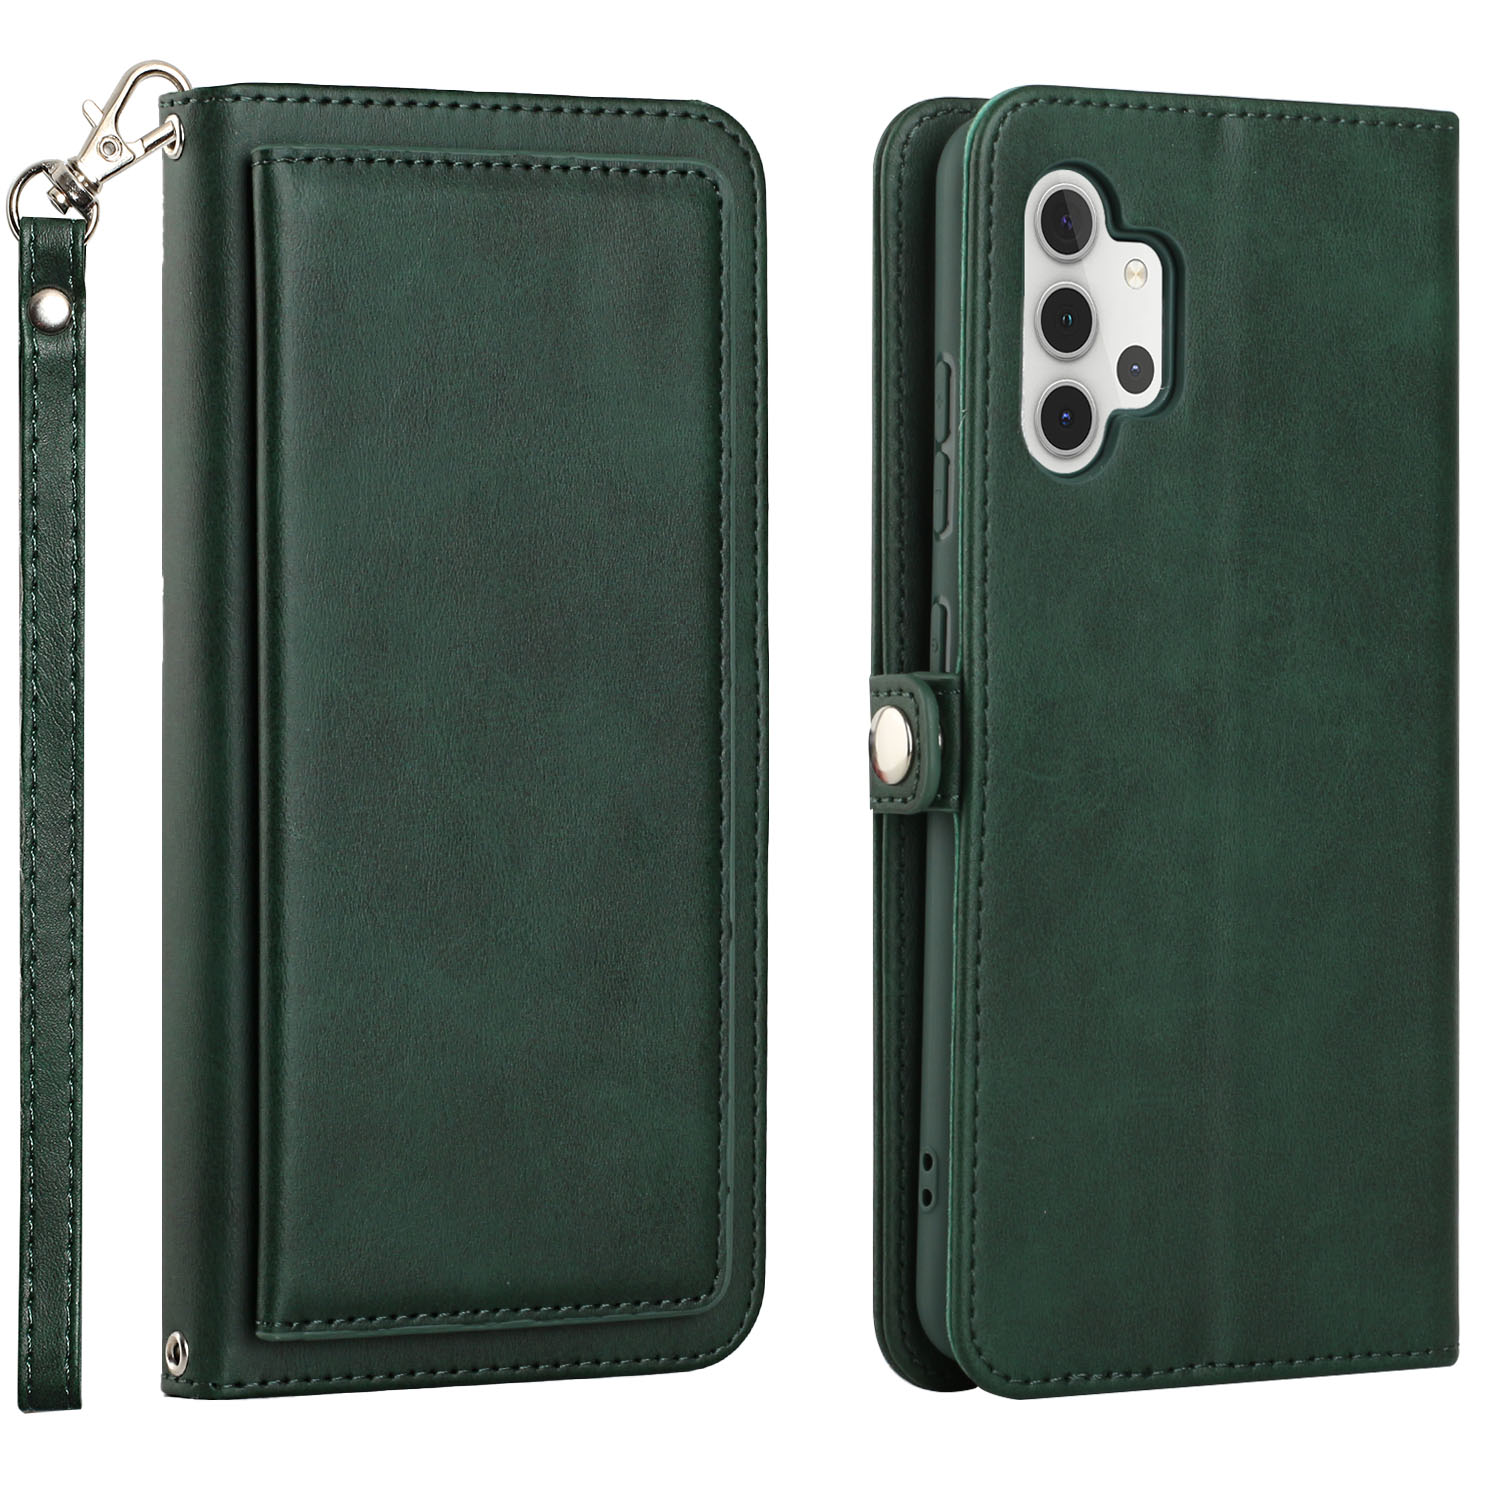 Premium PU Leather Folio WALLET Front Cover Case for Galaxy A32 4G (Green)